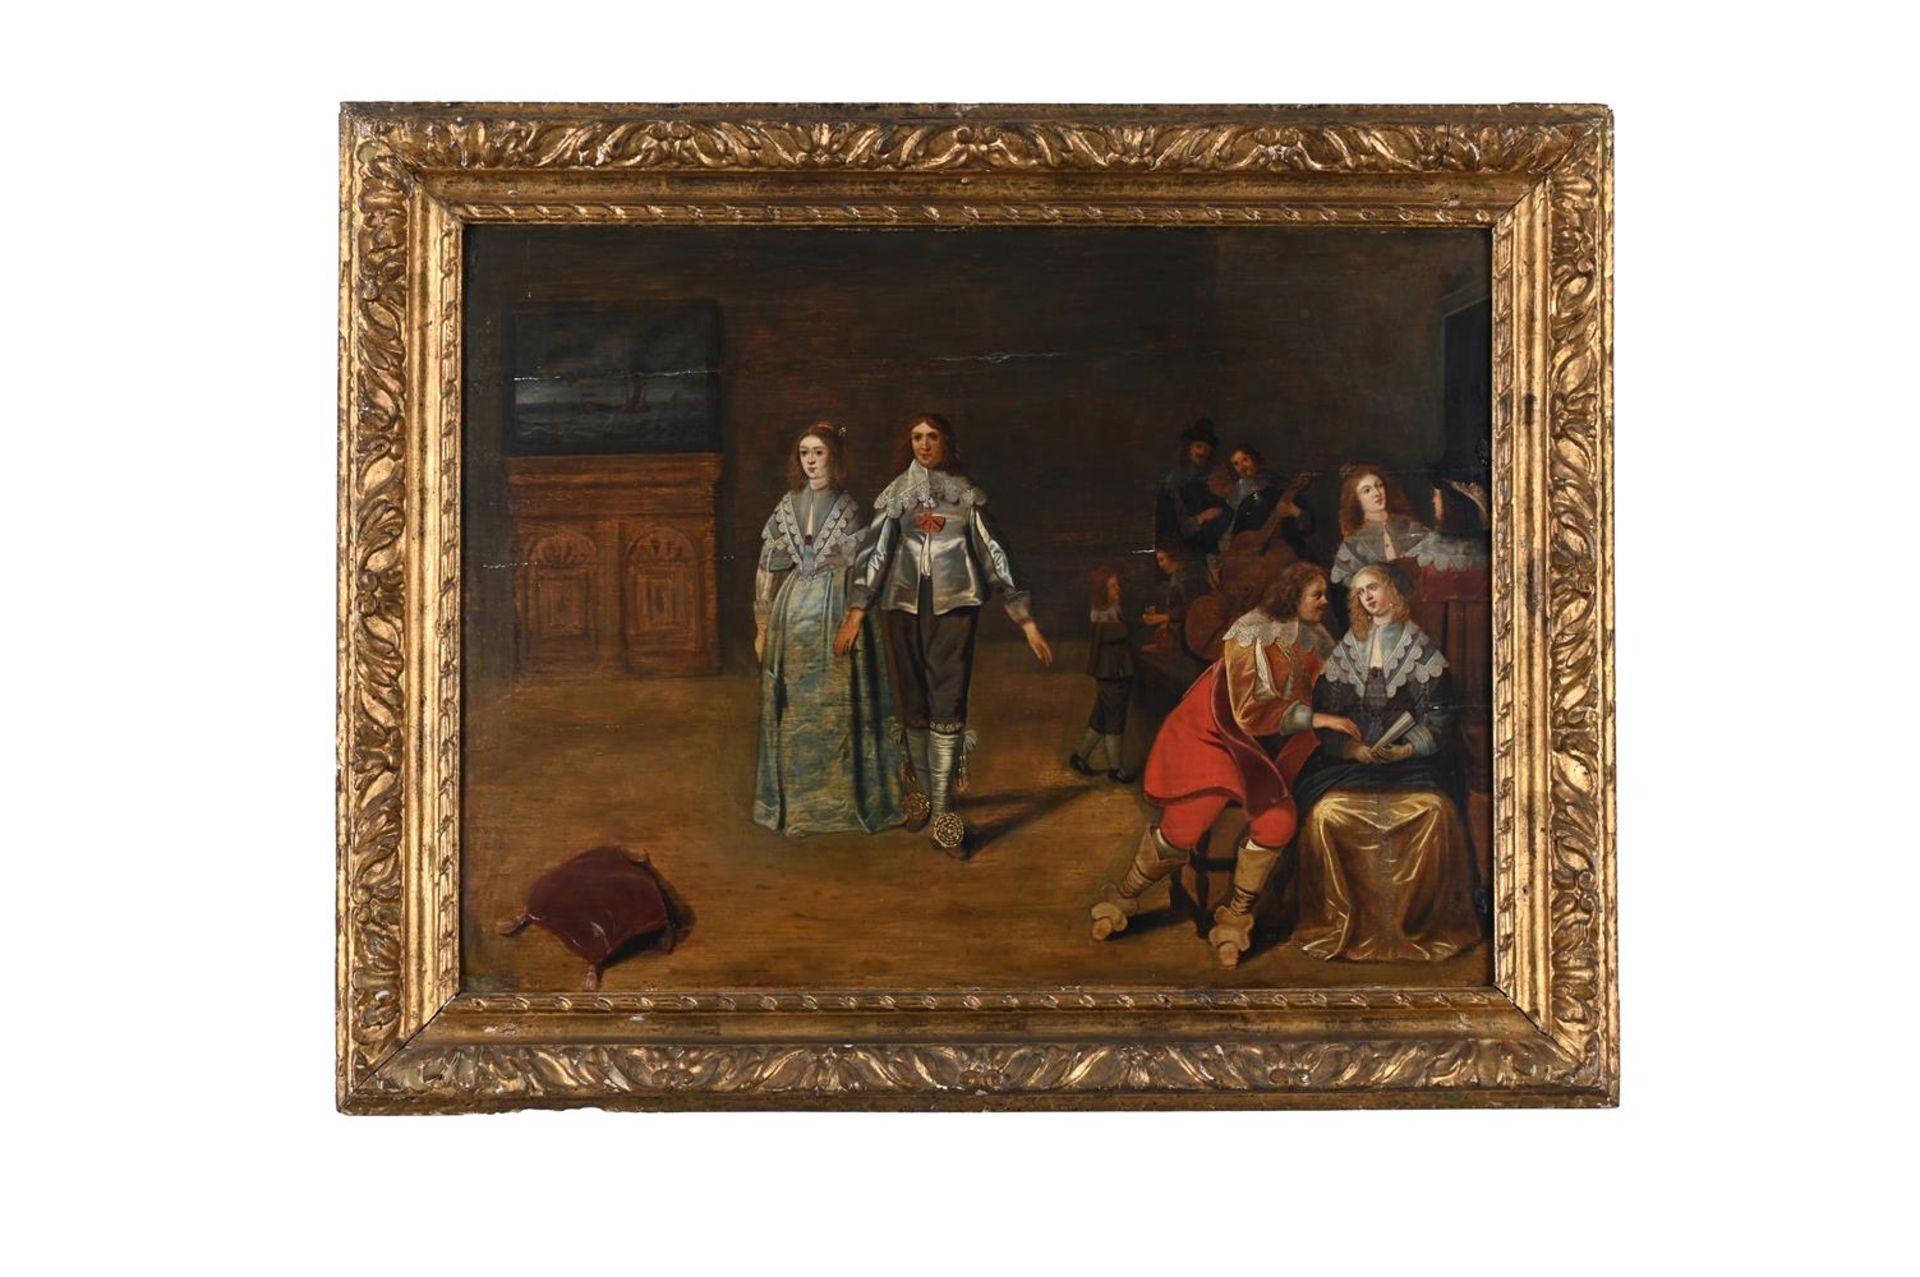 FOLLOWER OF CHRISTOFFEL JACOBZ VAN DER LAMEN, A COUPLE IN AN INTERIOR WITH OTHER FIGURES - Image 2 of 3